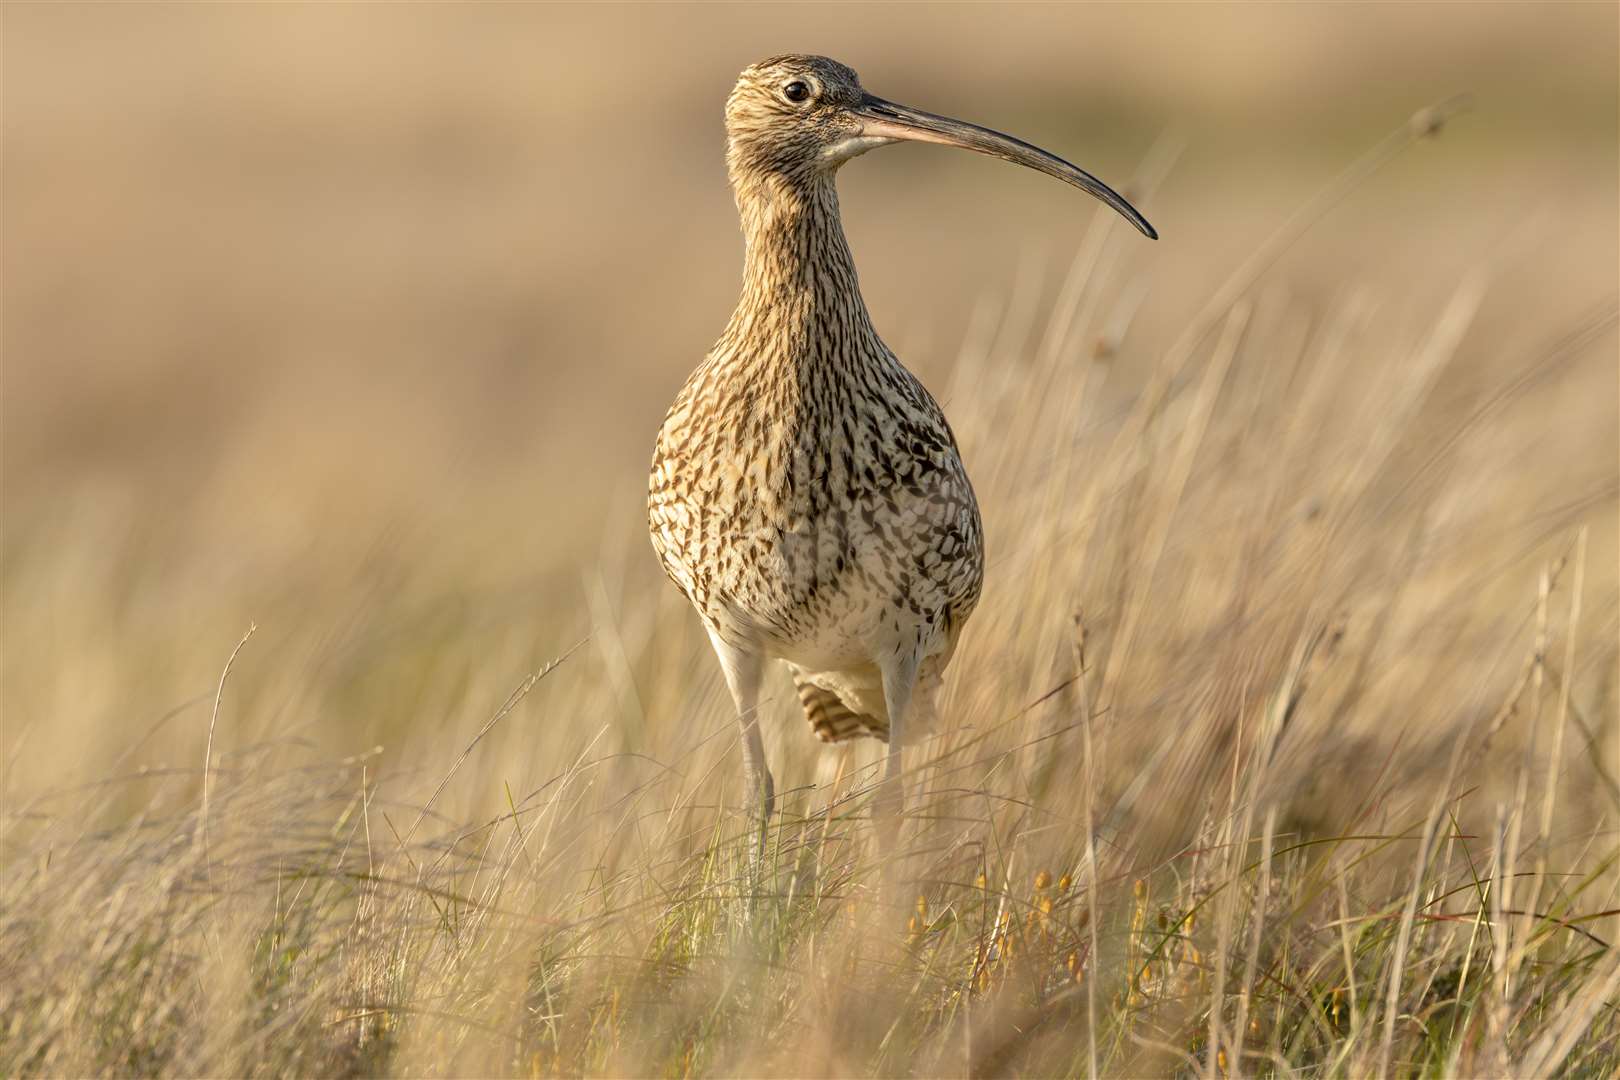 Campaign group No to Swarclett has claimed that wind turbines will drive curlews away. Picture: Adobe Stock / Anne Coatesy